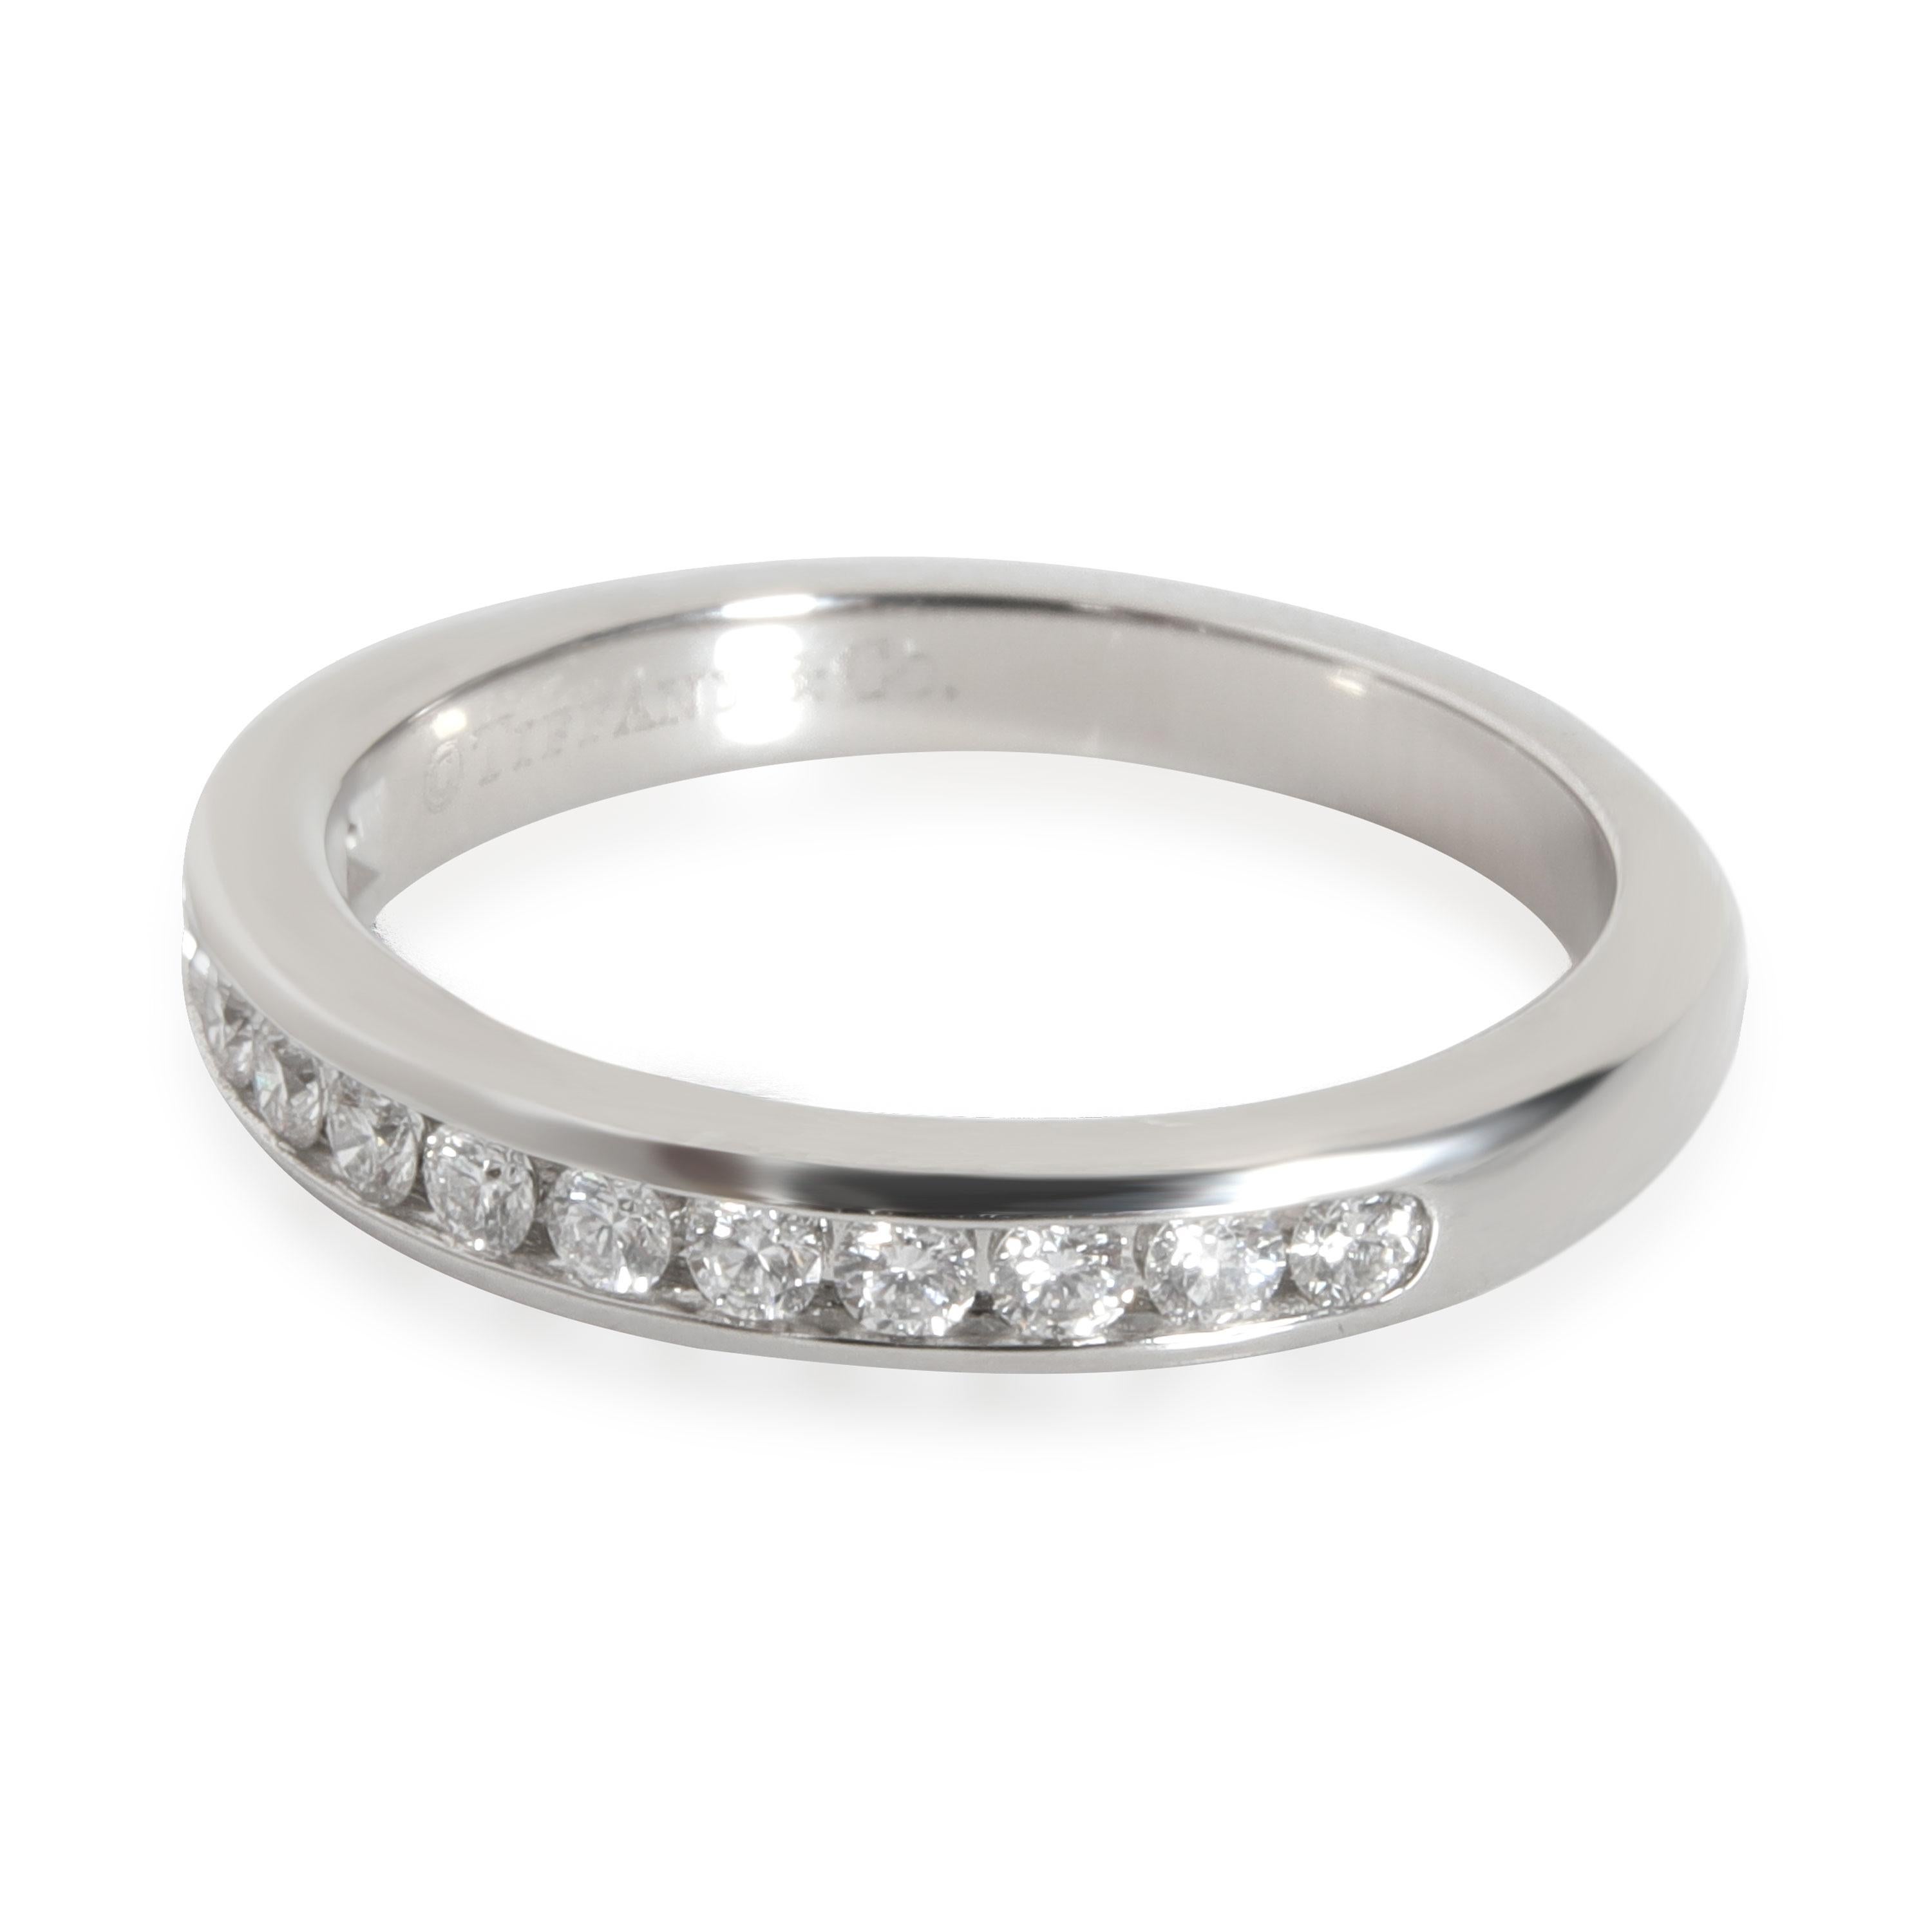 Tiffany & Co. Channel Diamond Wedding Band in Platinum 0.24 CTW In Excellent Condition For Sale In New York, NY